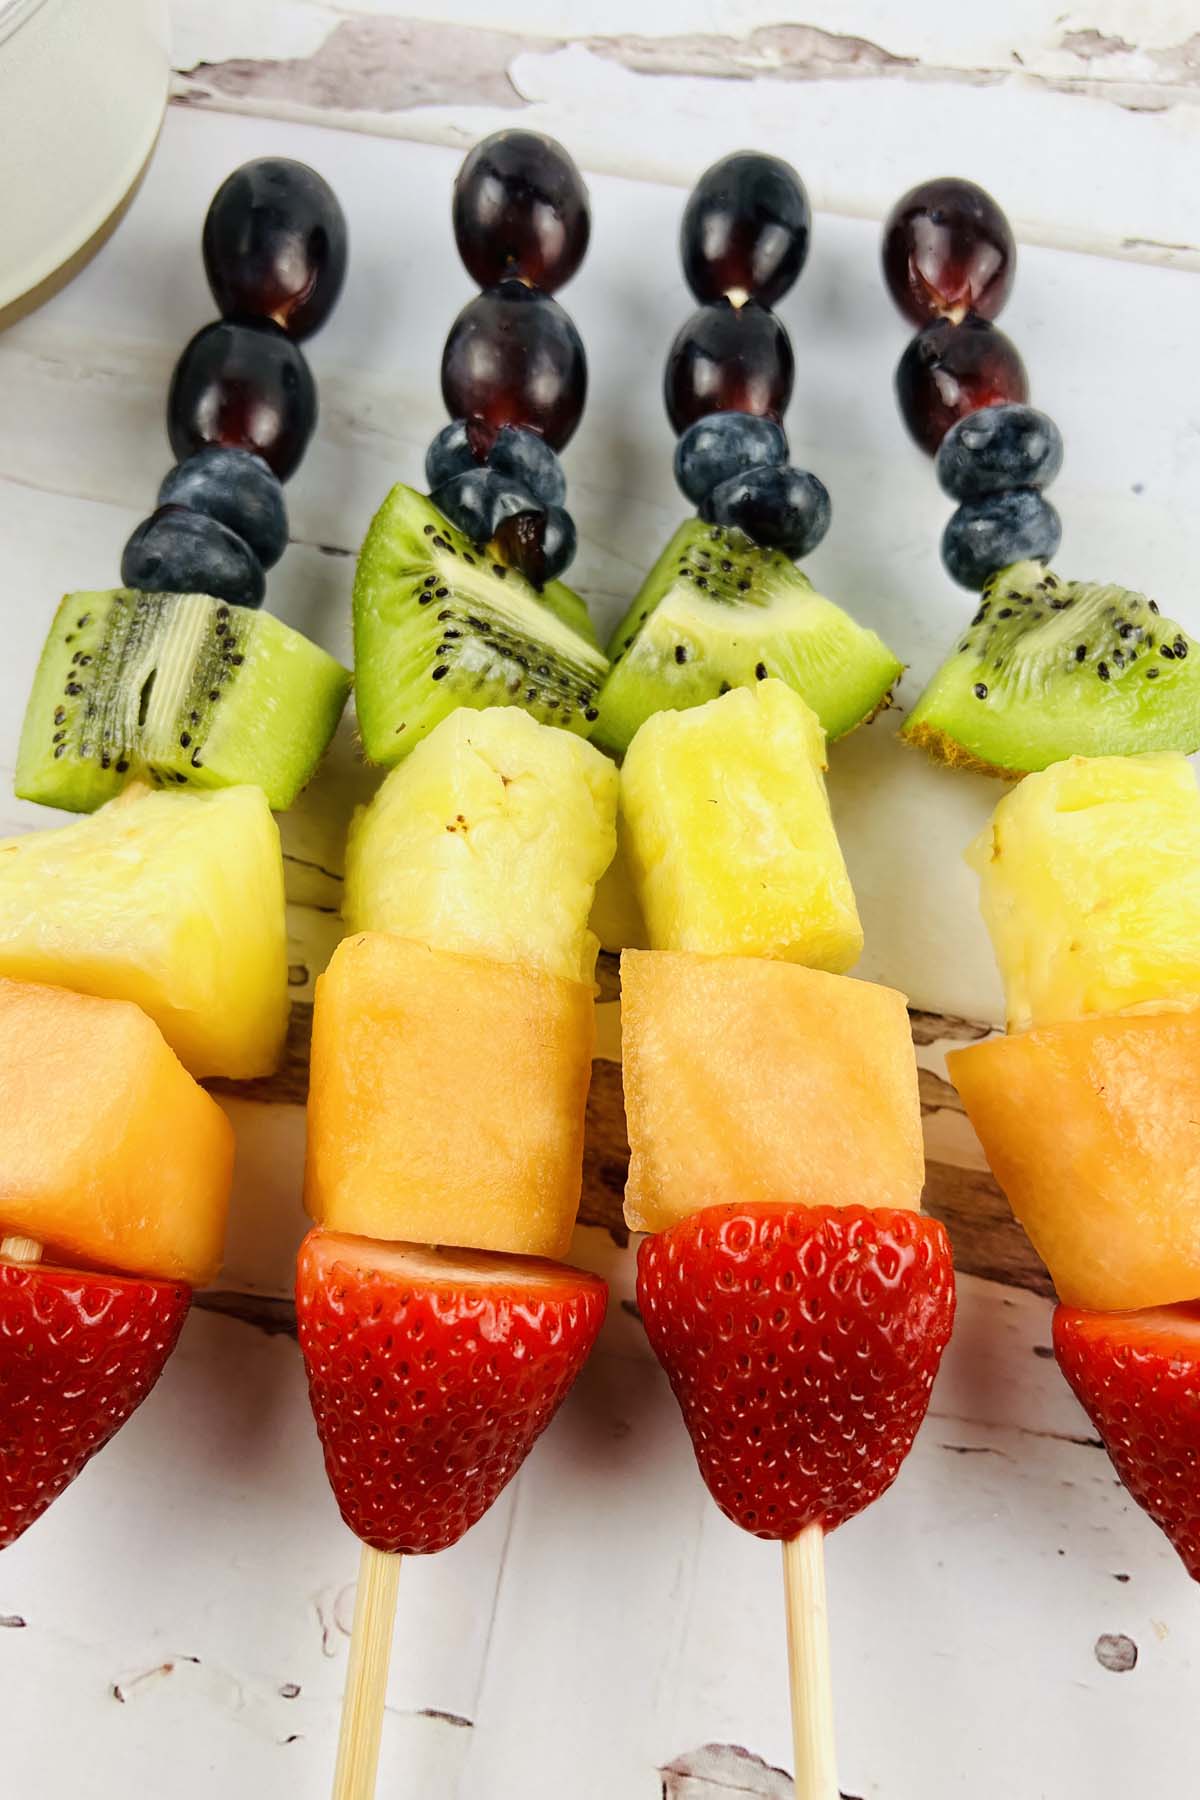 Four assembled fruit skewers.